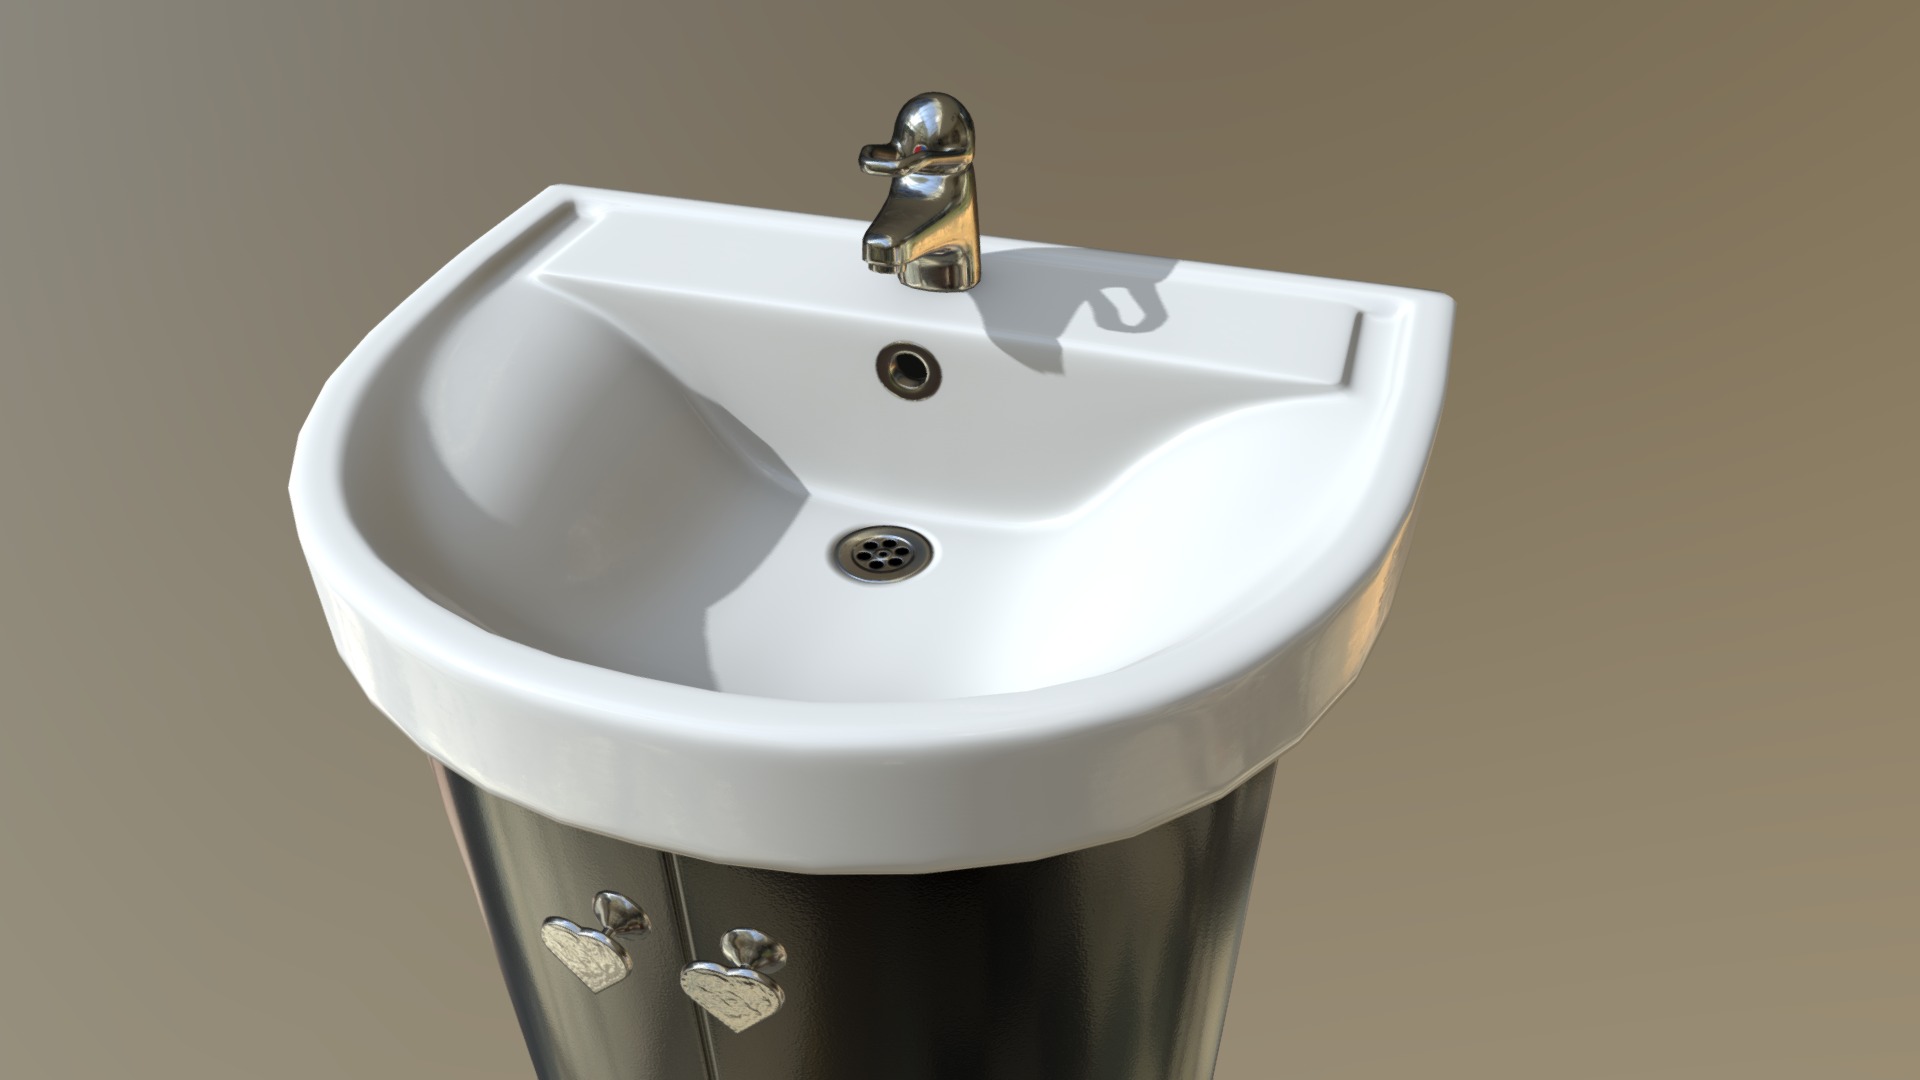 High poly bathroom sink and cupboard. Can be used as a game asset.

Modeled in Blender 3D, textured in Substance Painter 3d model